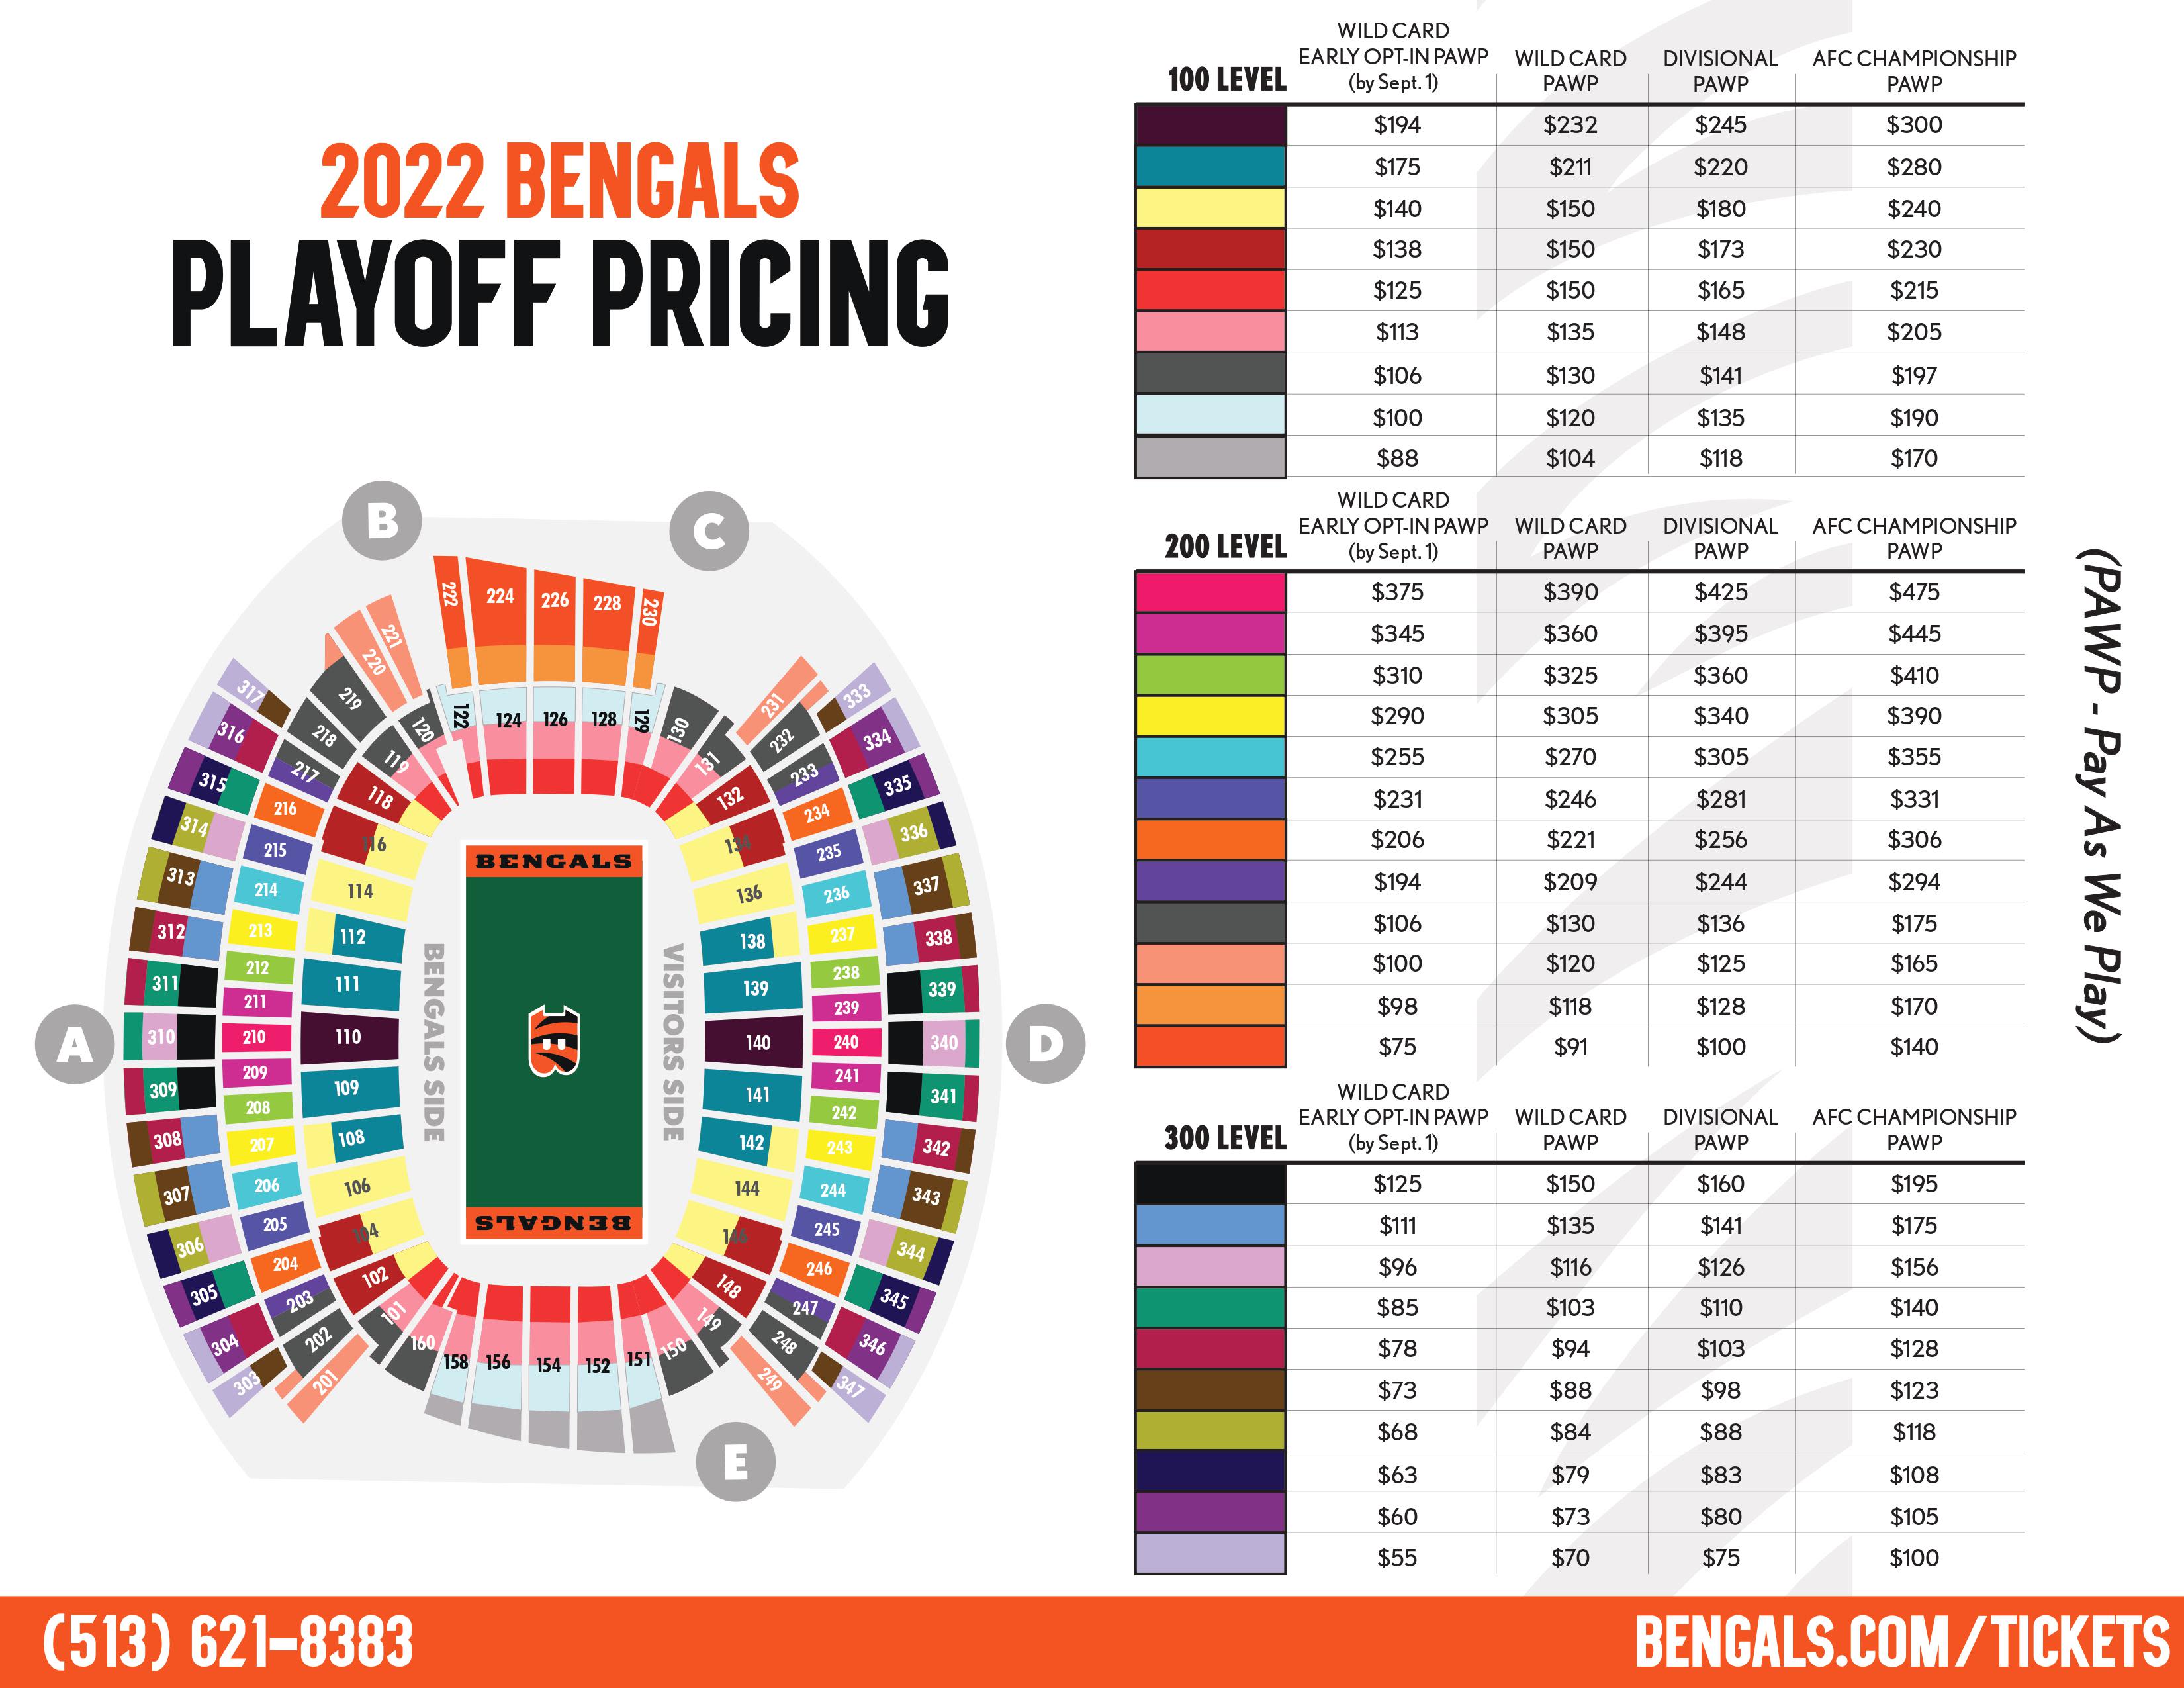 How To Find The Cheapest NFL Playoff Tickets + Face Value Options